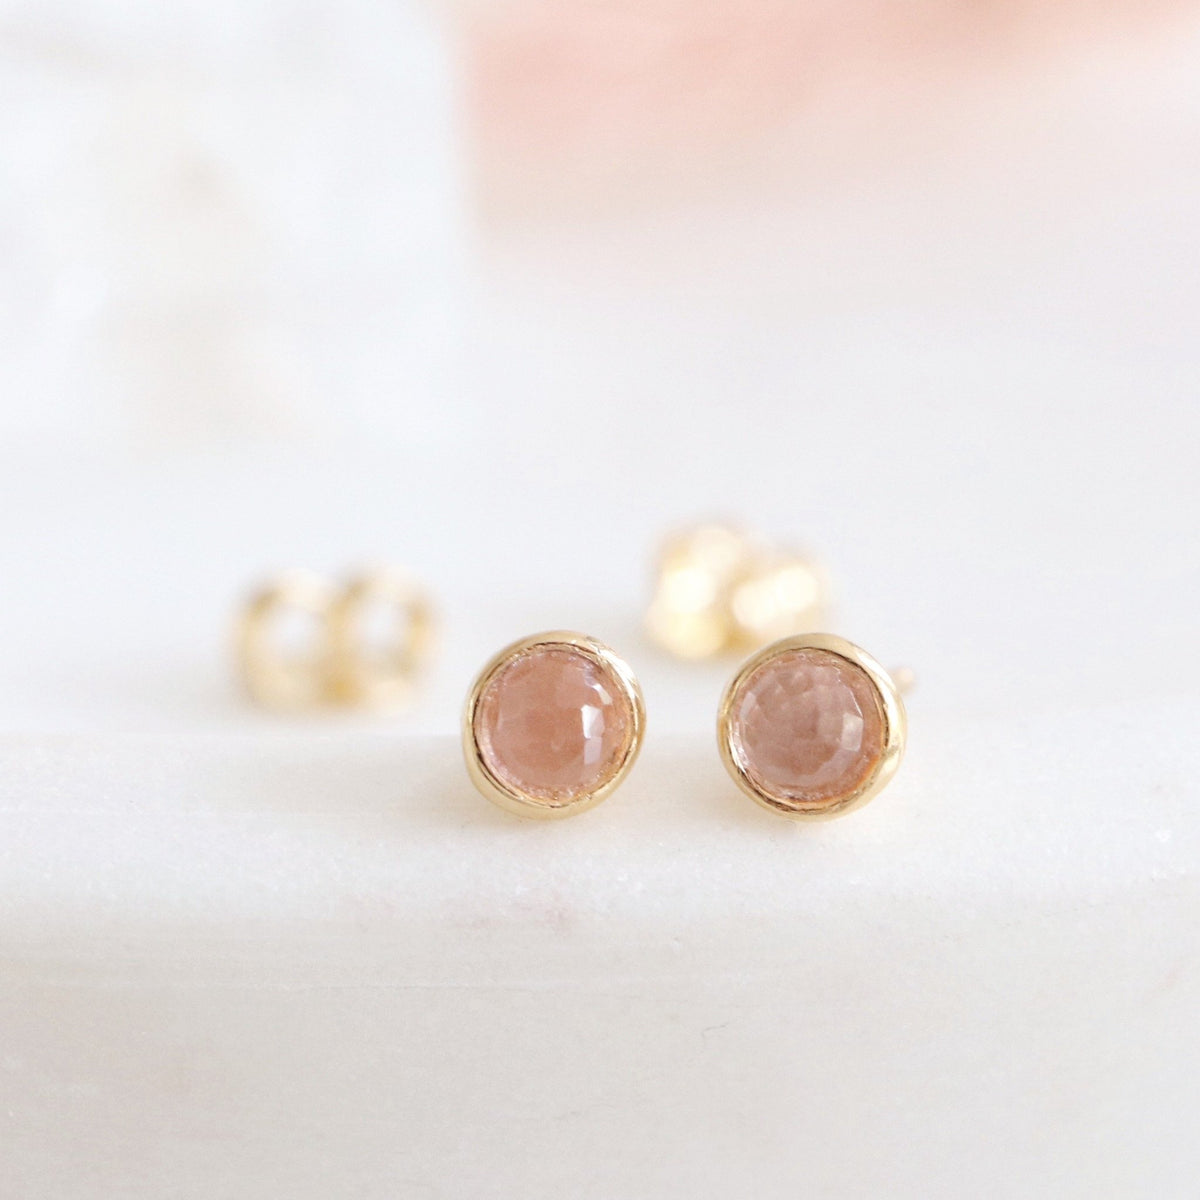 TINY PROTECT STUD EARRINGS - PINK QUARTZ &amp; GOLD - SO PRETTY CARA COTTER